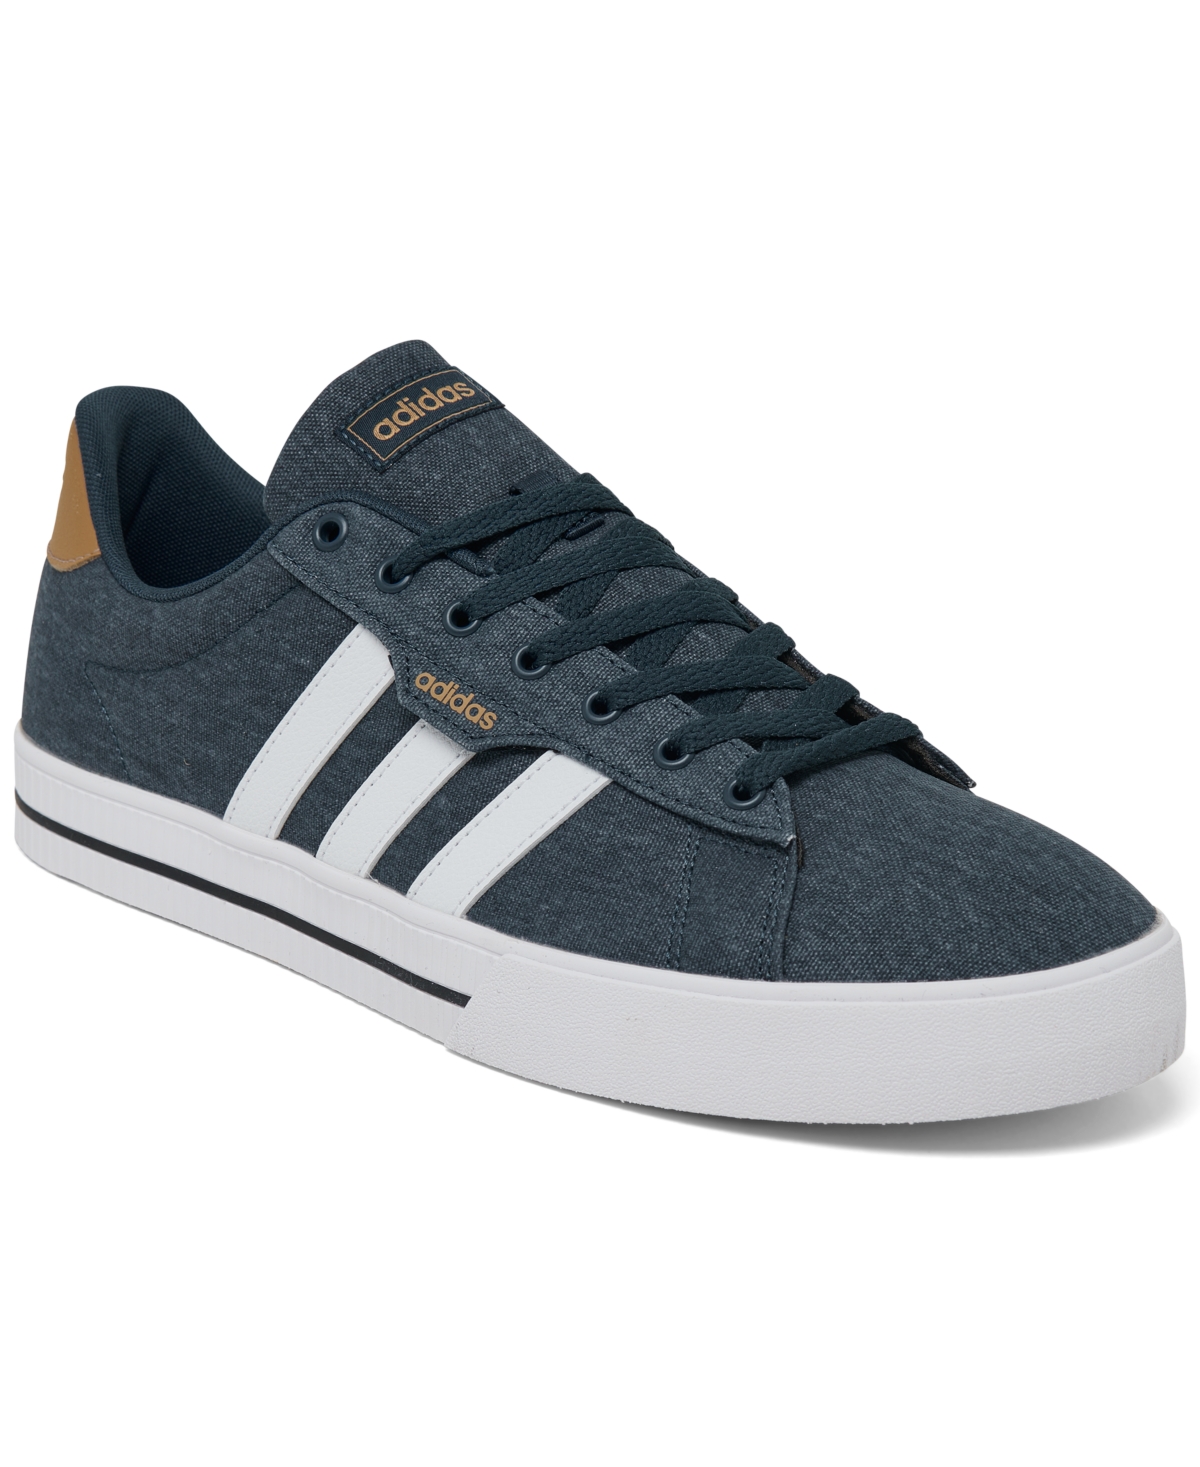 Adidas Originals Men's Daily 3.0 Casual Sneakers From Finish Line In Crew Navy,white